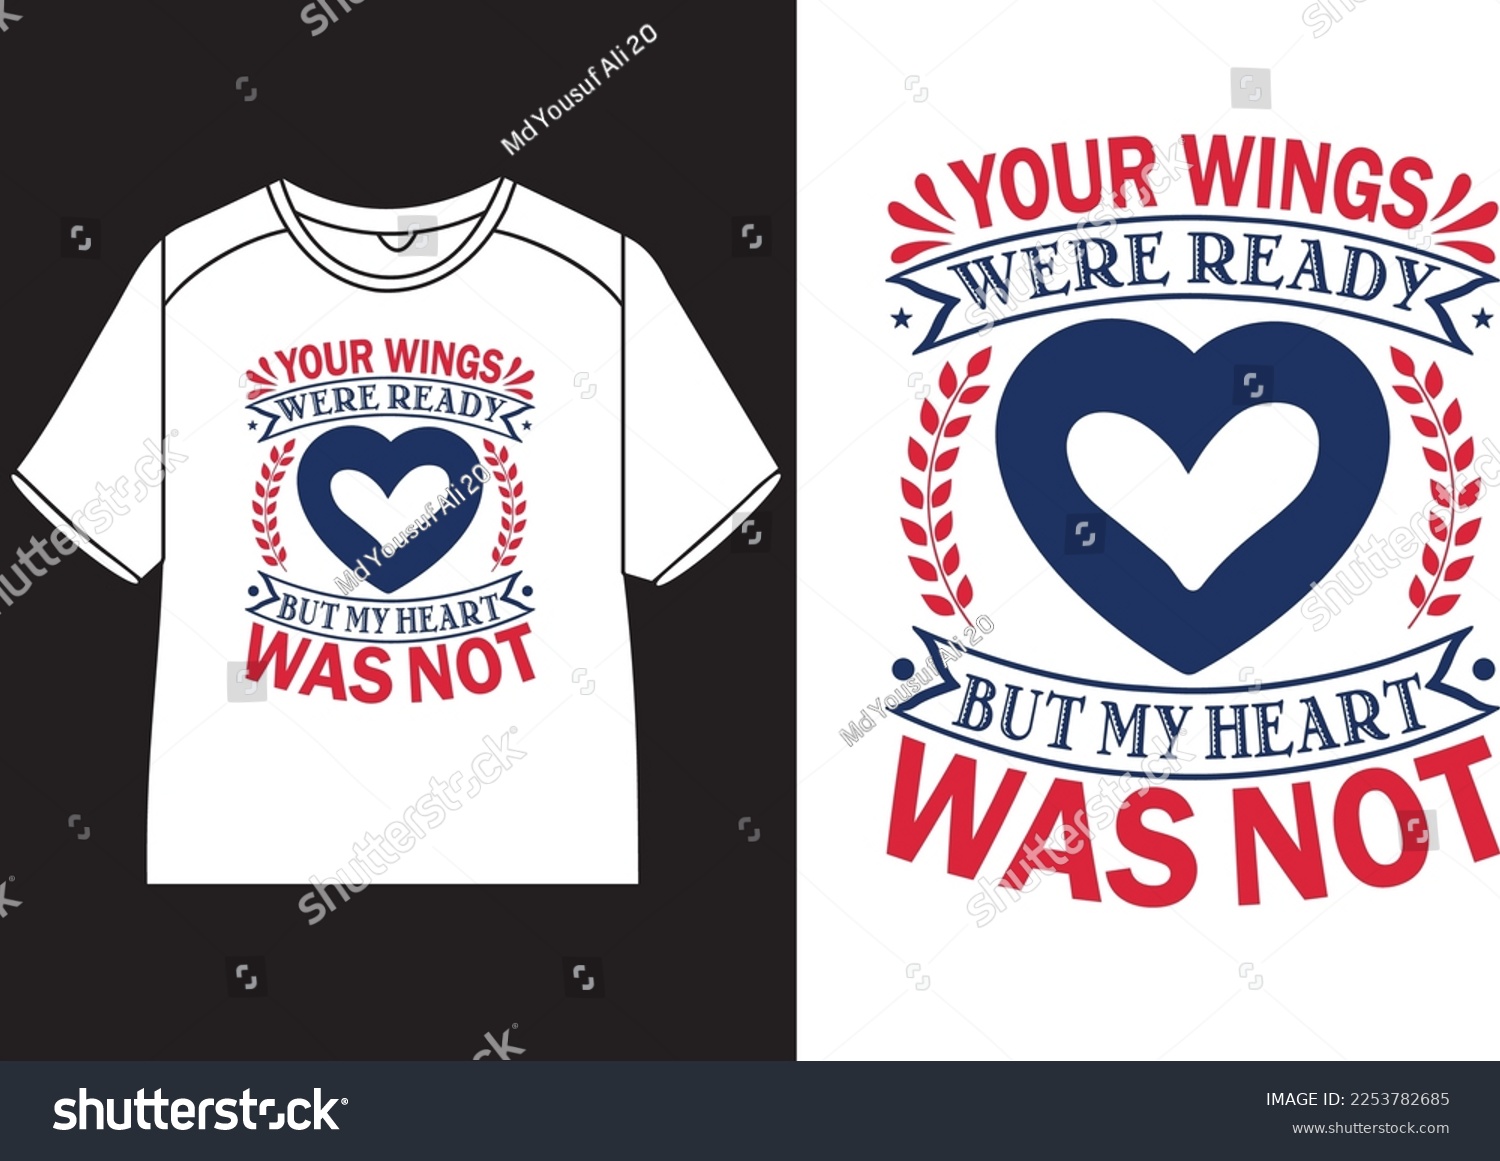 SVG of Your wings were ready, but my heart was not T-Shirt Design svg